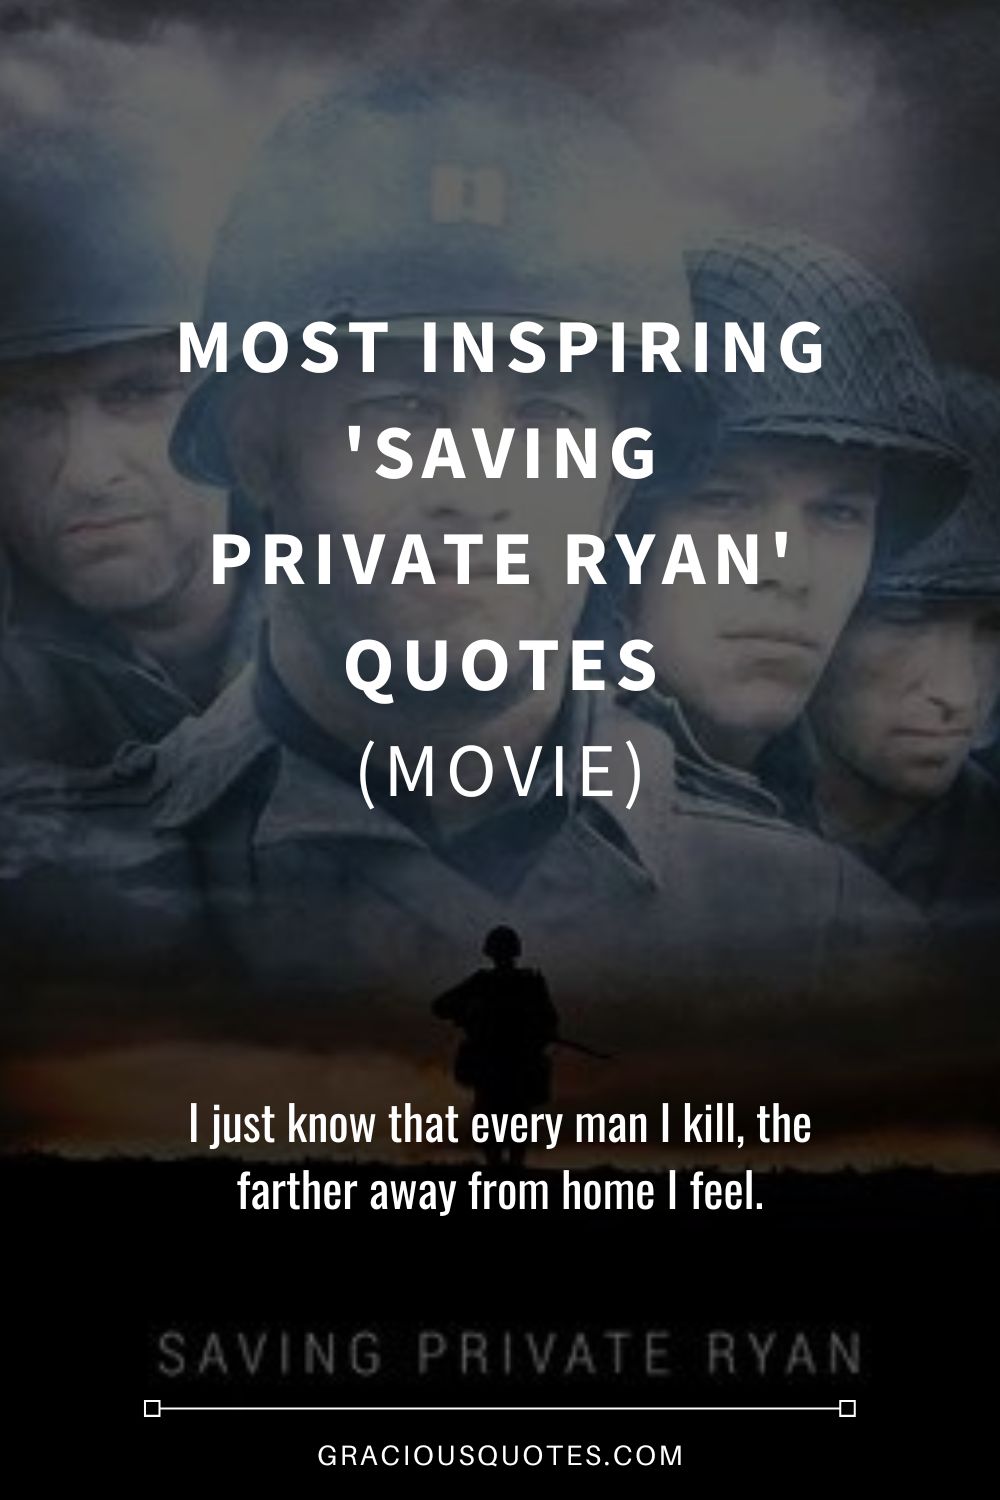 Most Inspiring 'Saving Private Ryan' Quotes (MOVIE) - Gracious Quotes